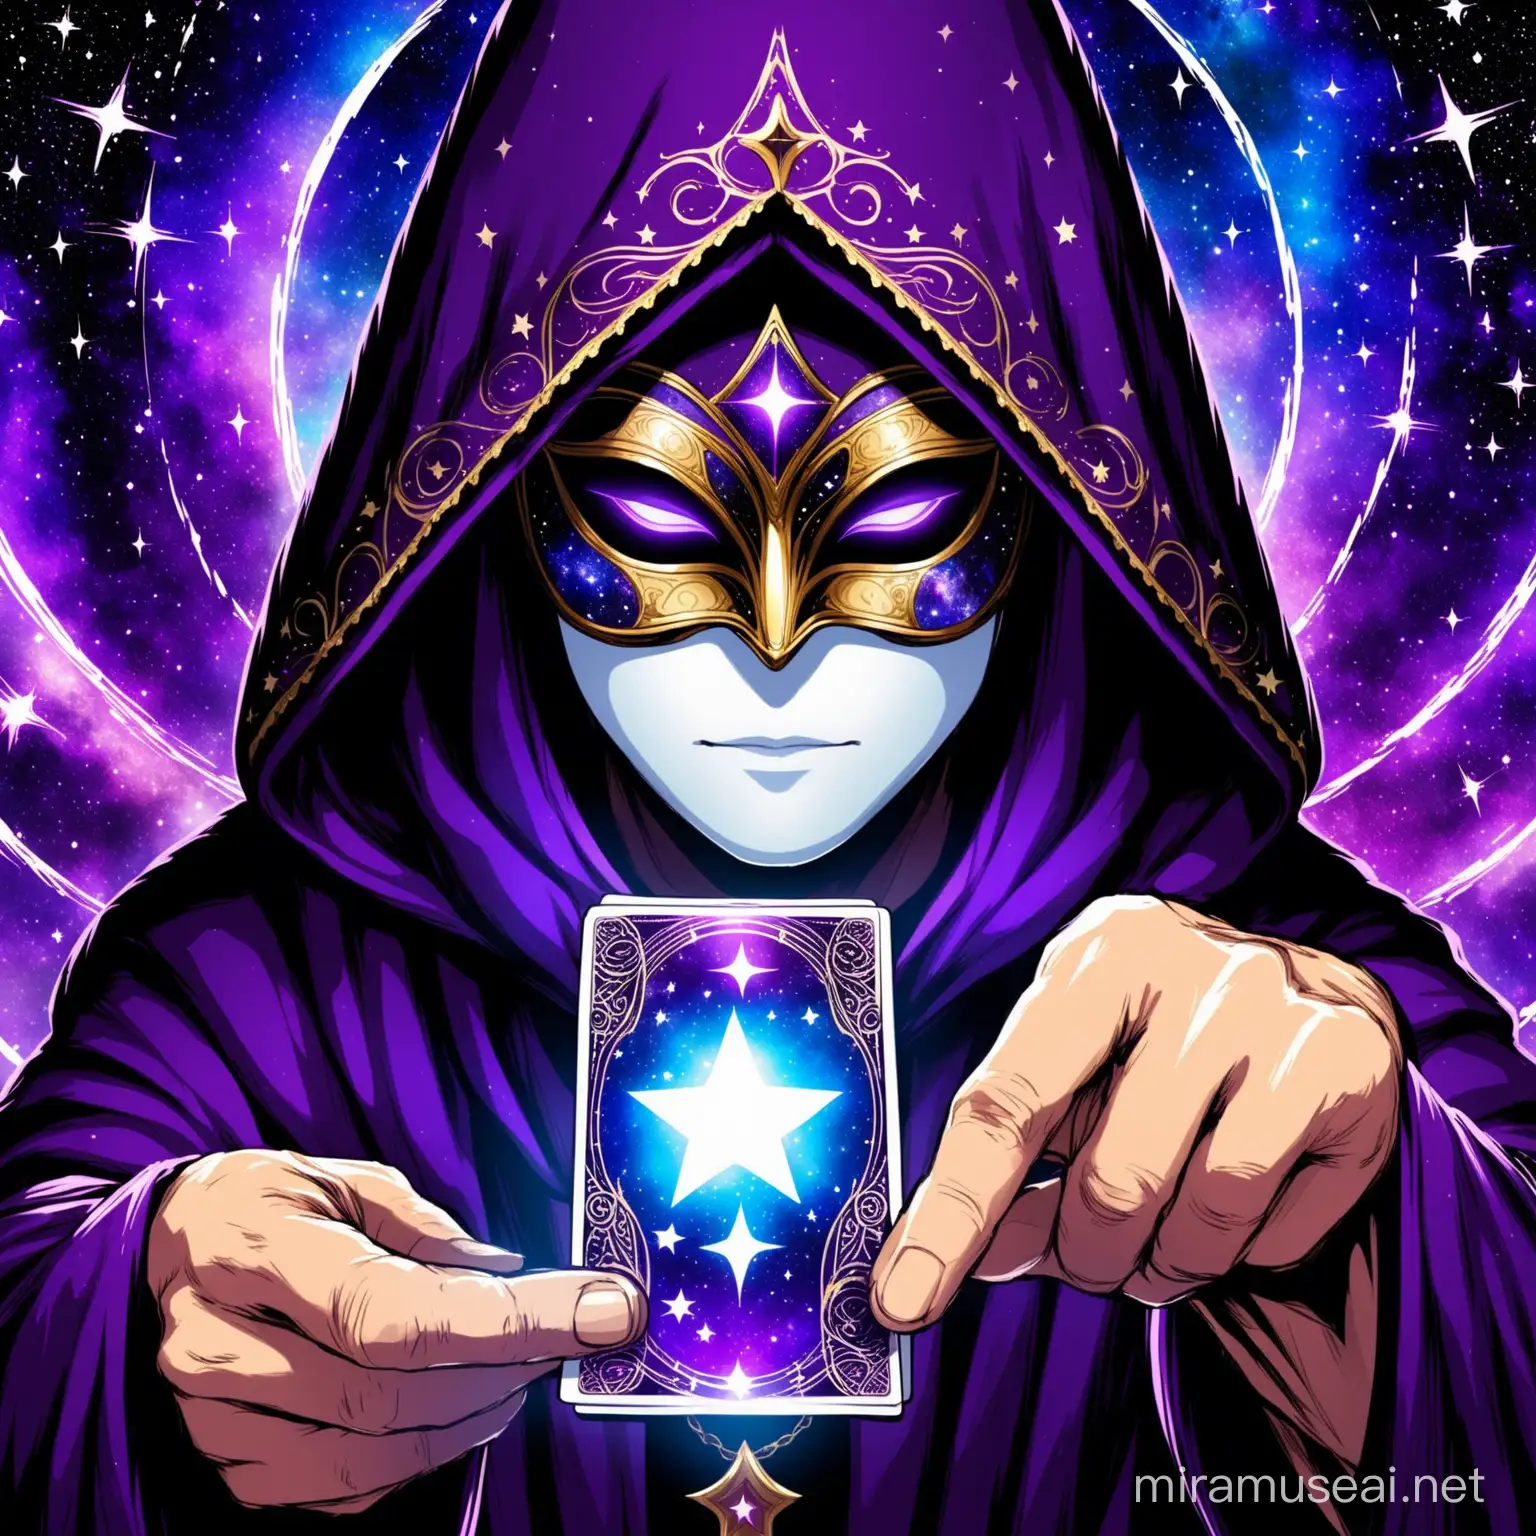 Galactic Fortune Teller Holding Tarot Card in Violet Hooded Fantasy Setting